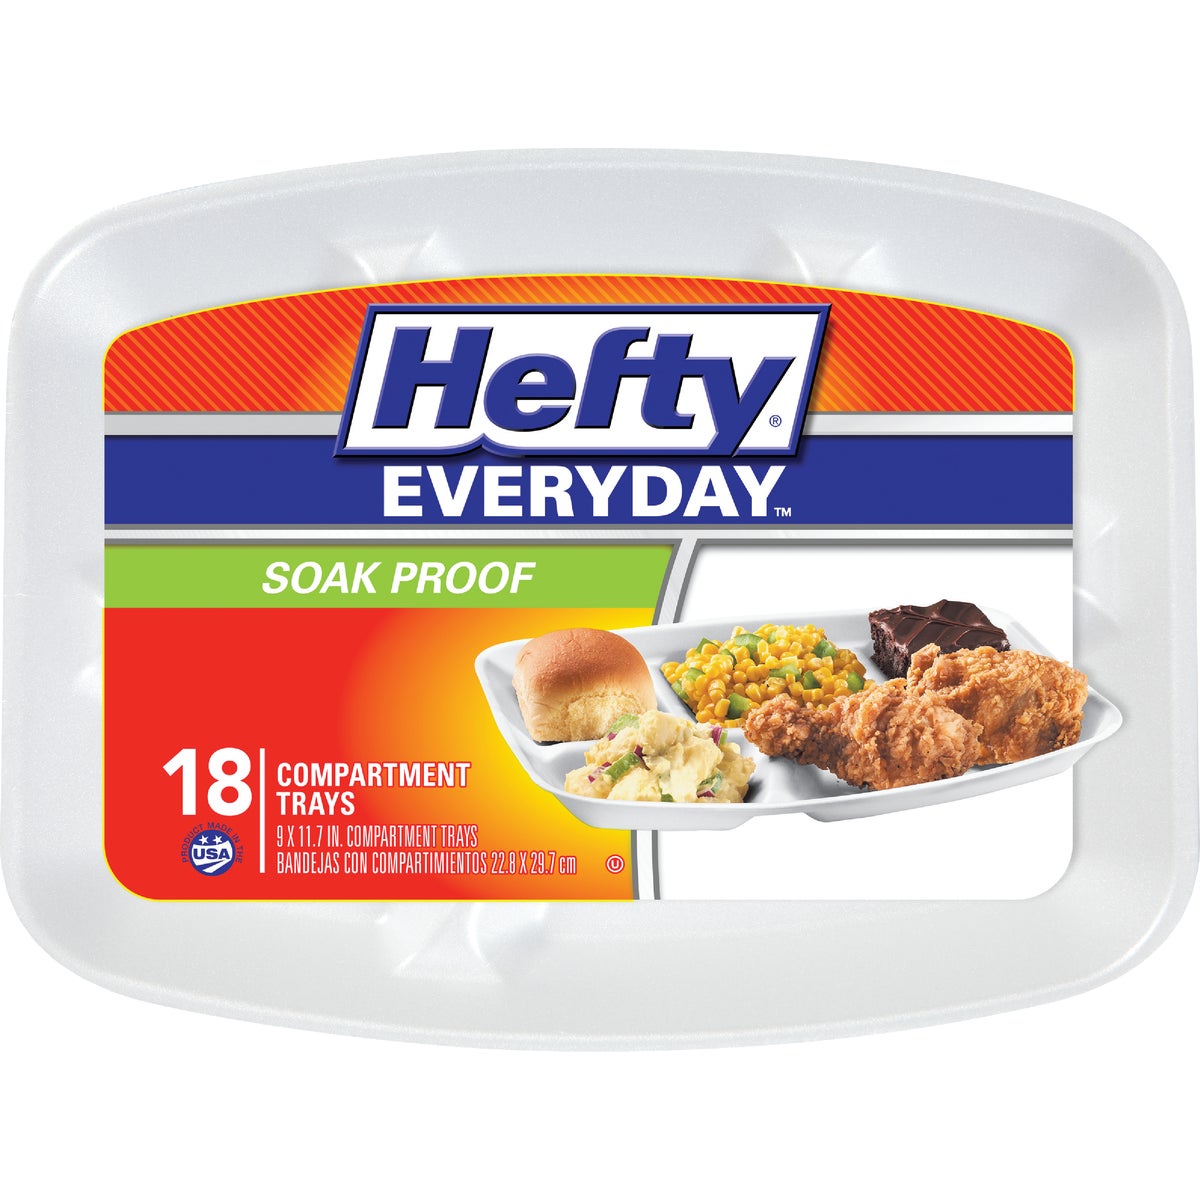 Hefty Everyday 11.7 In. x 9 In. Compartment Foam Plate (18-Count)